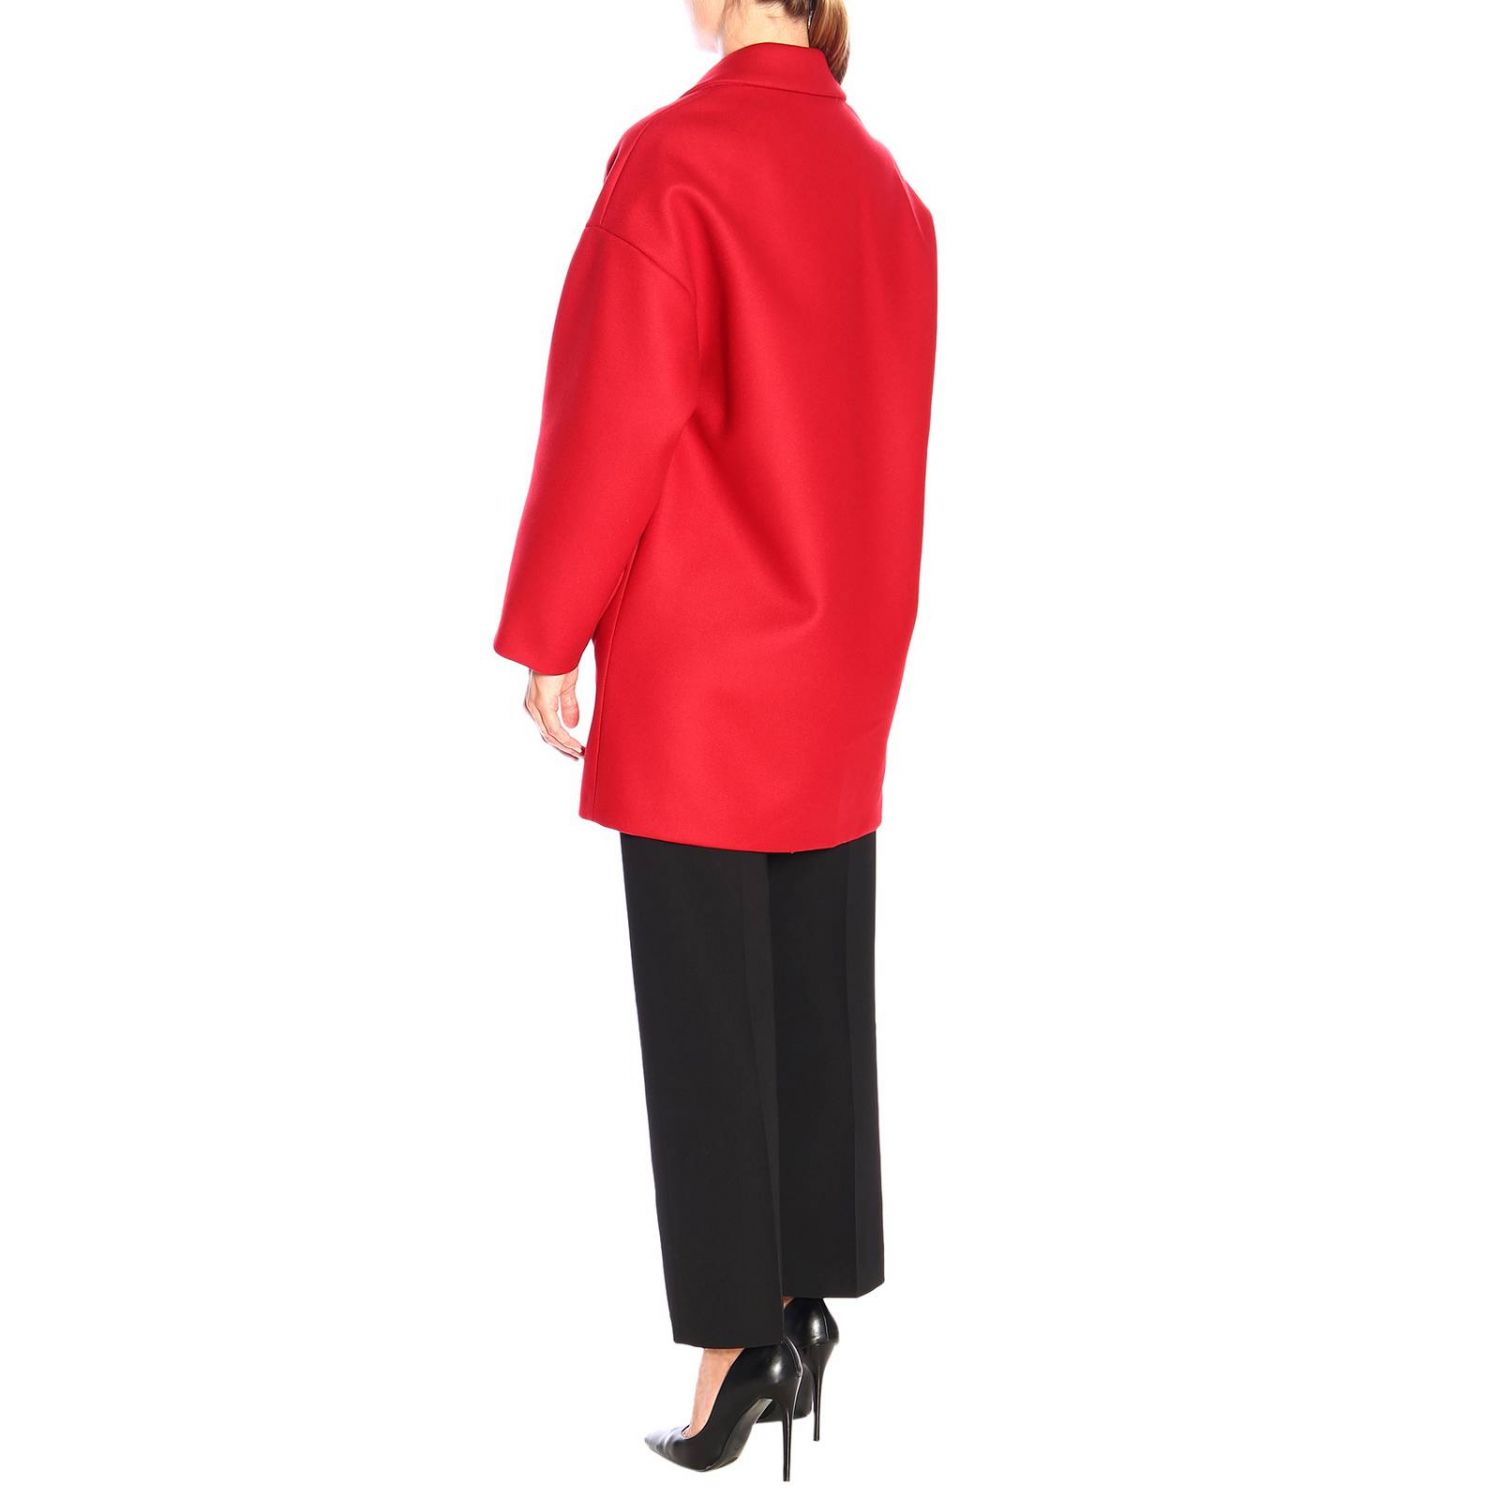 RED VALENTINO: double-breasted coat with pockets | Coat Red Women Red | Red Valentino SR3CAA80 497 GIGLIO.COM